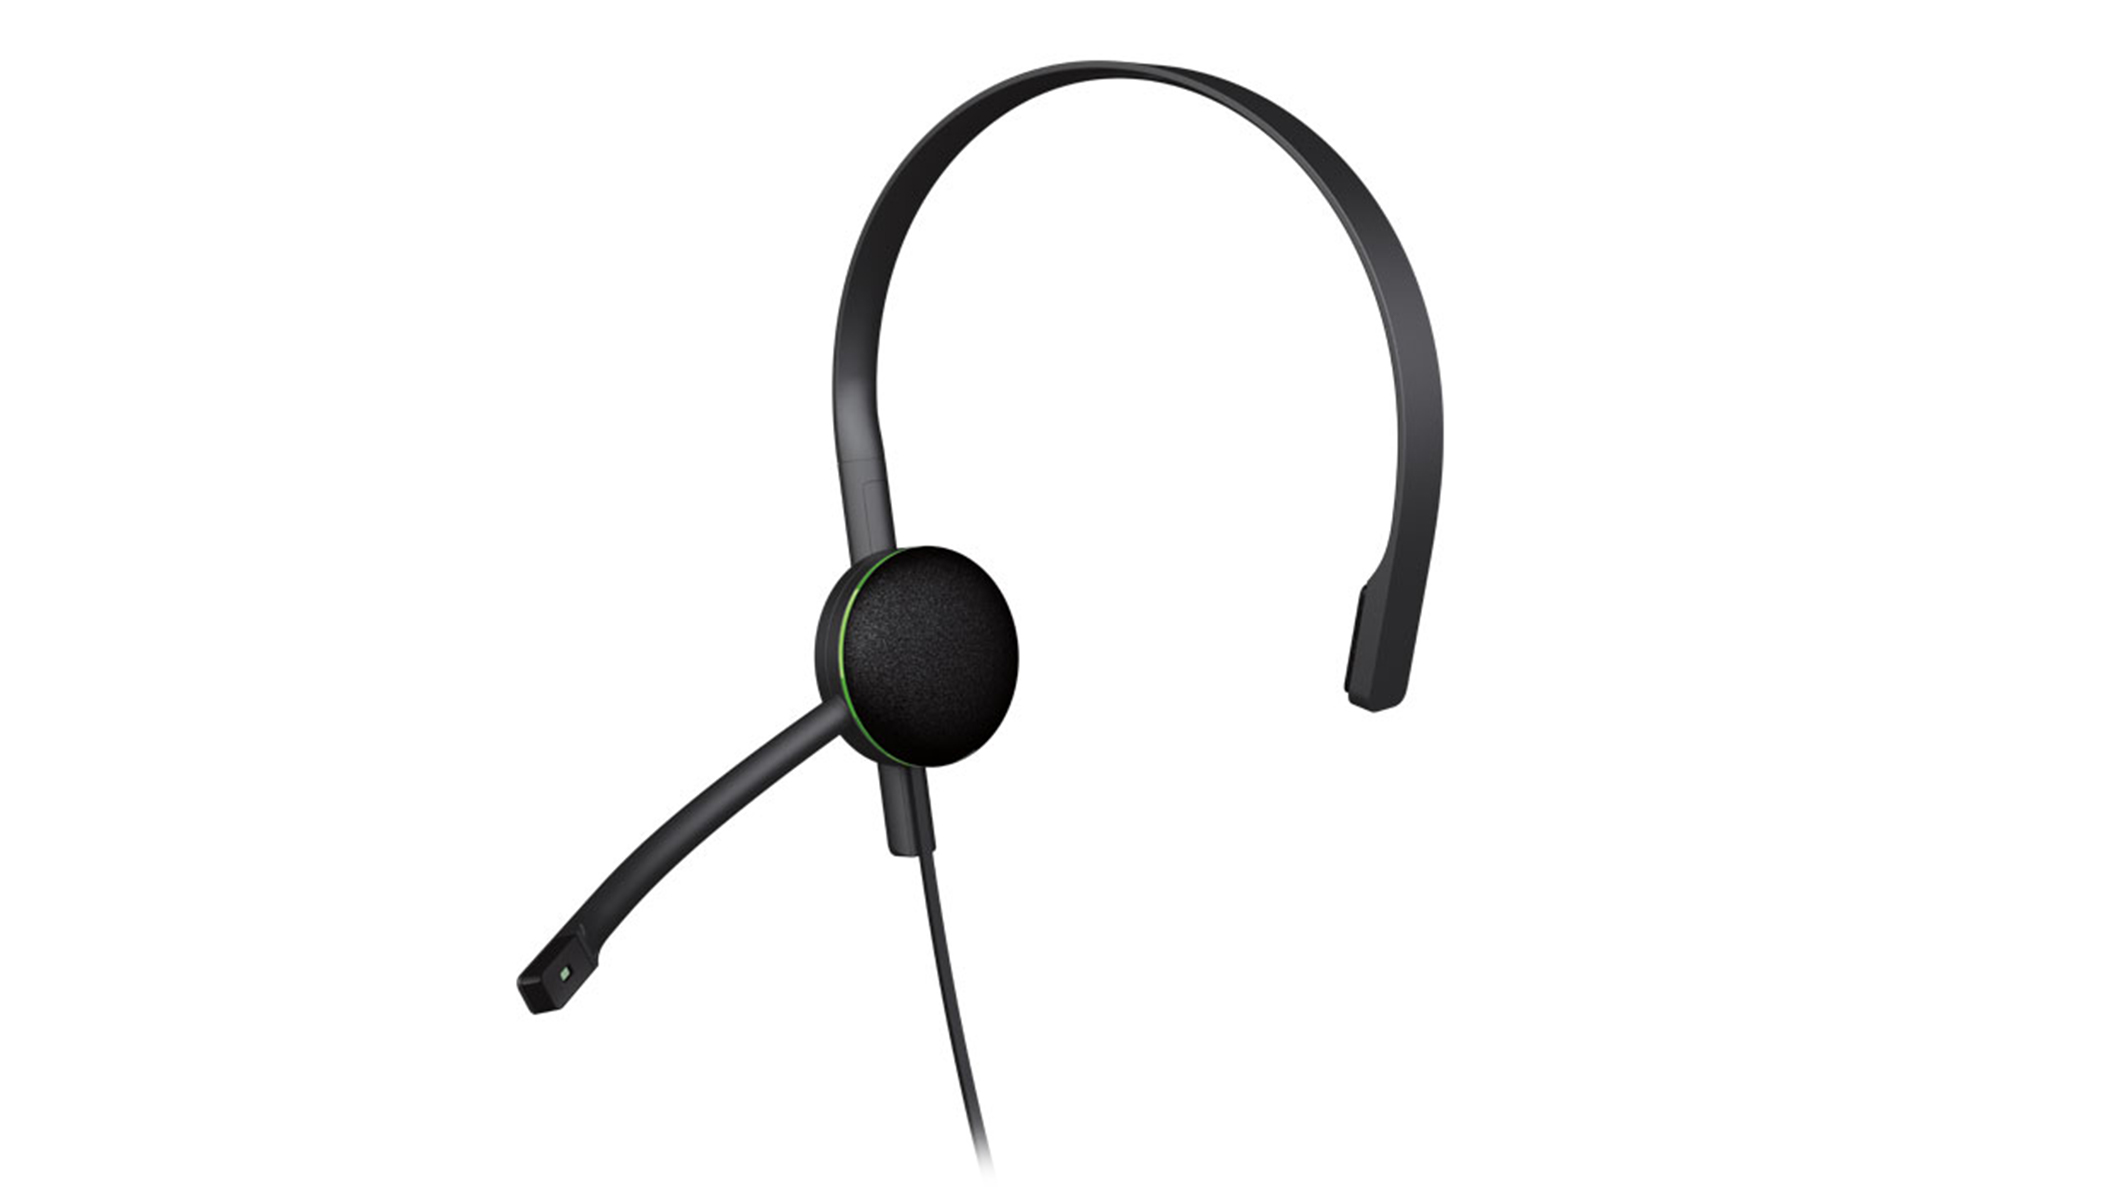 xbox one official chat headset